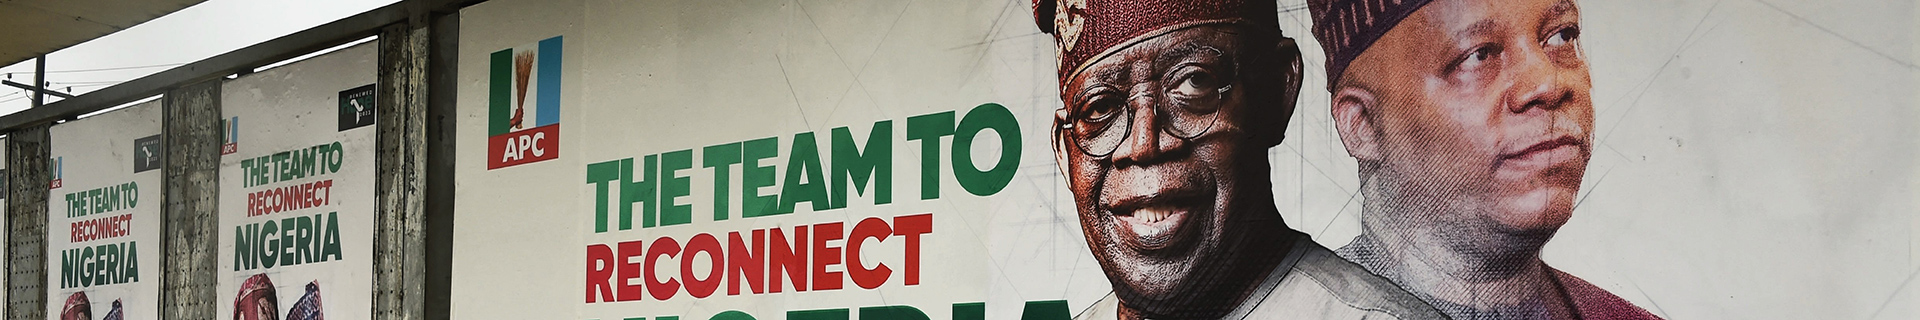 The Tinubu administration – new direction or status quo?